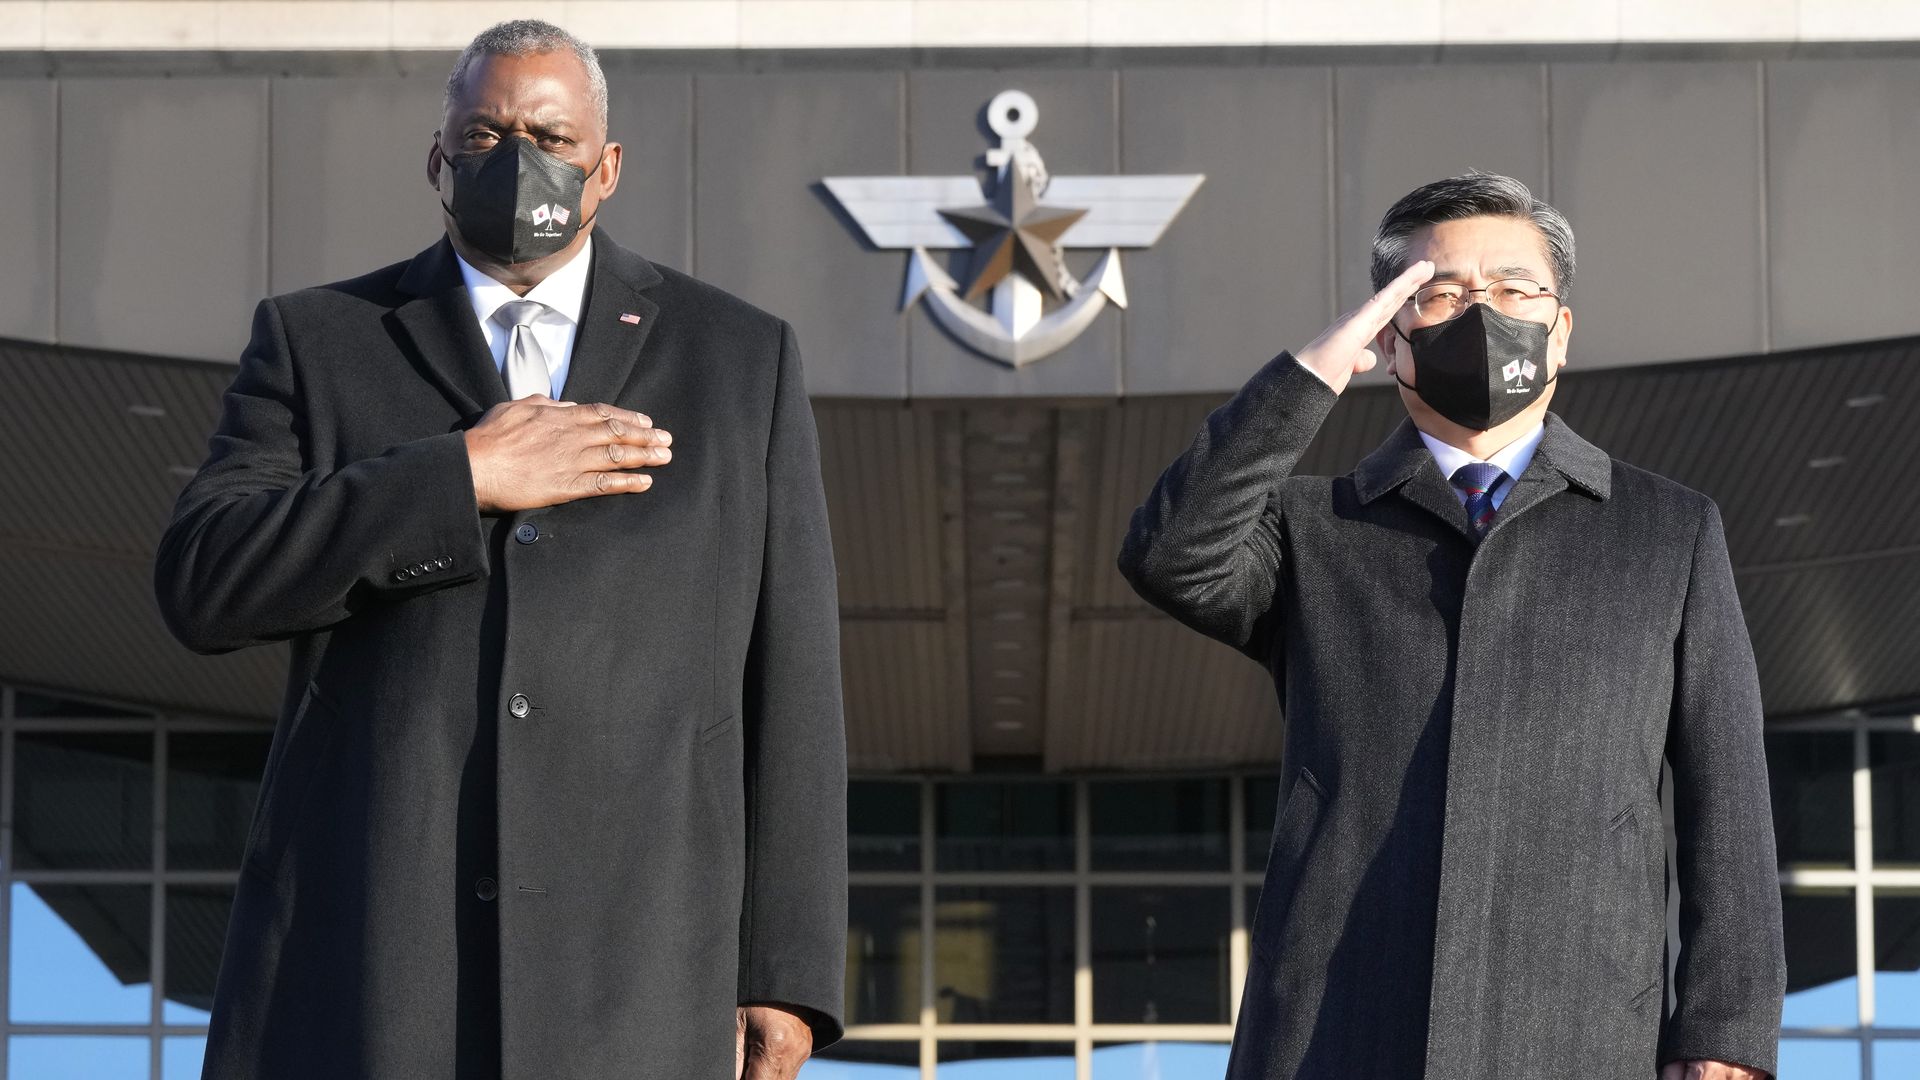  Secretary of Defense Lloyd Austin (L)  with South Korea's defense minister Suh Wook (R) during a welcoming ceremony  on December 02, 2021 in Seoul, South Korea. 